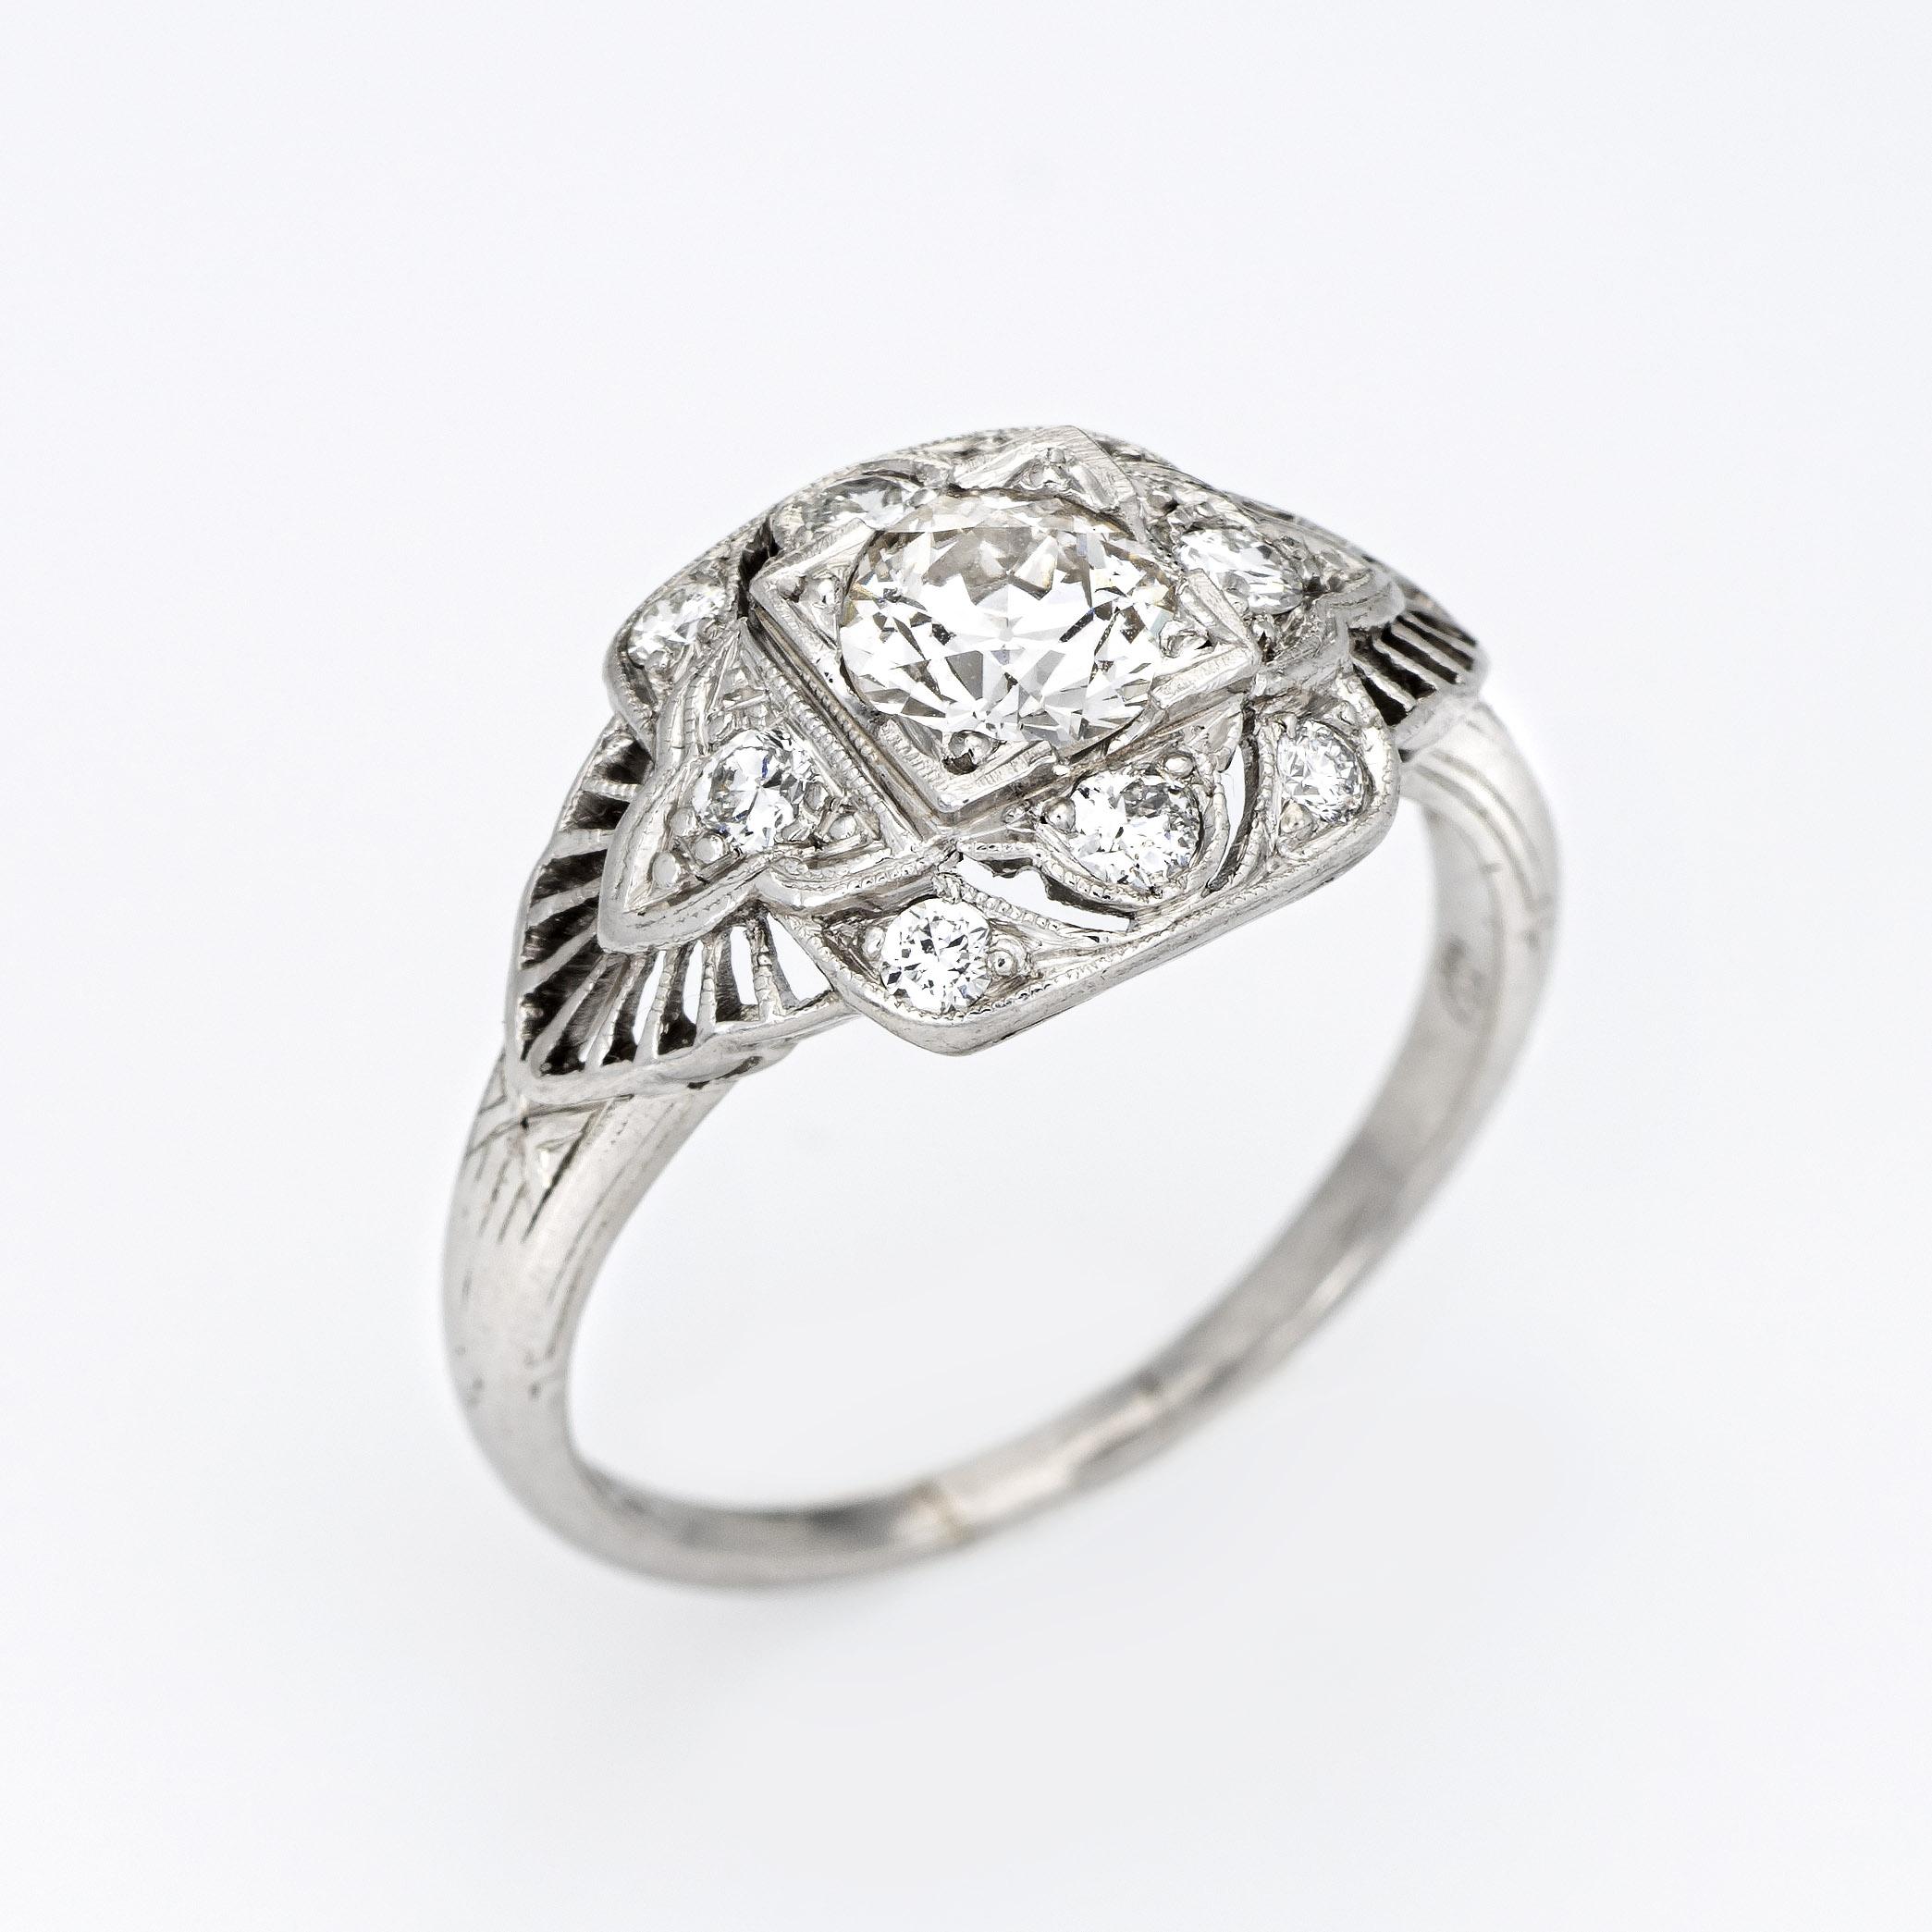 Finely detailed vintage Art Deco era diamond engagement ring (circa 1920s to 1930s) crafted in 900 platinum. 

Centrally mounted 0.57 carat old European cut diamond (L color and SI1 clarity). The mount is accented with a further 0.44 carats of